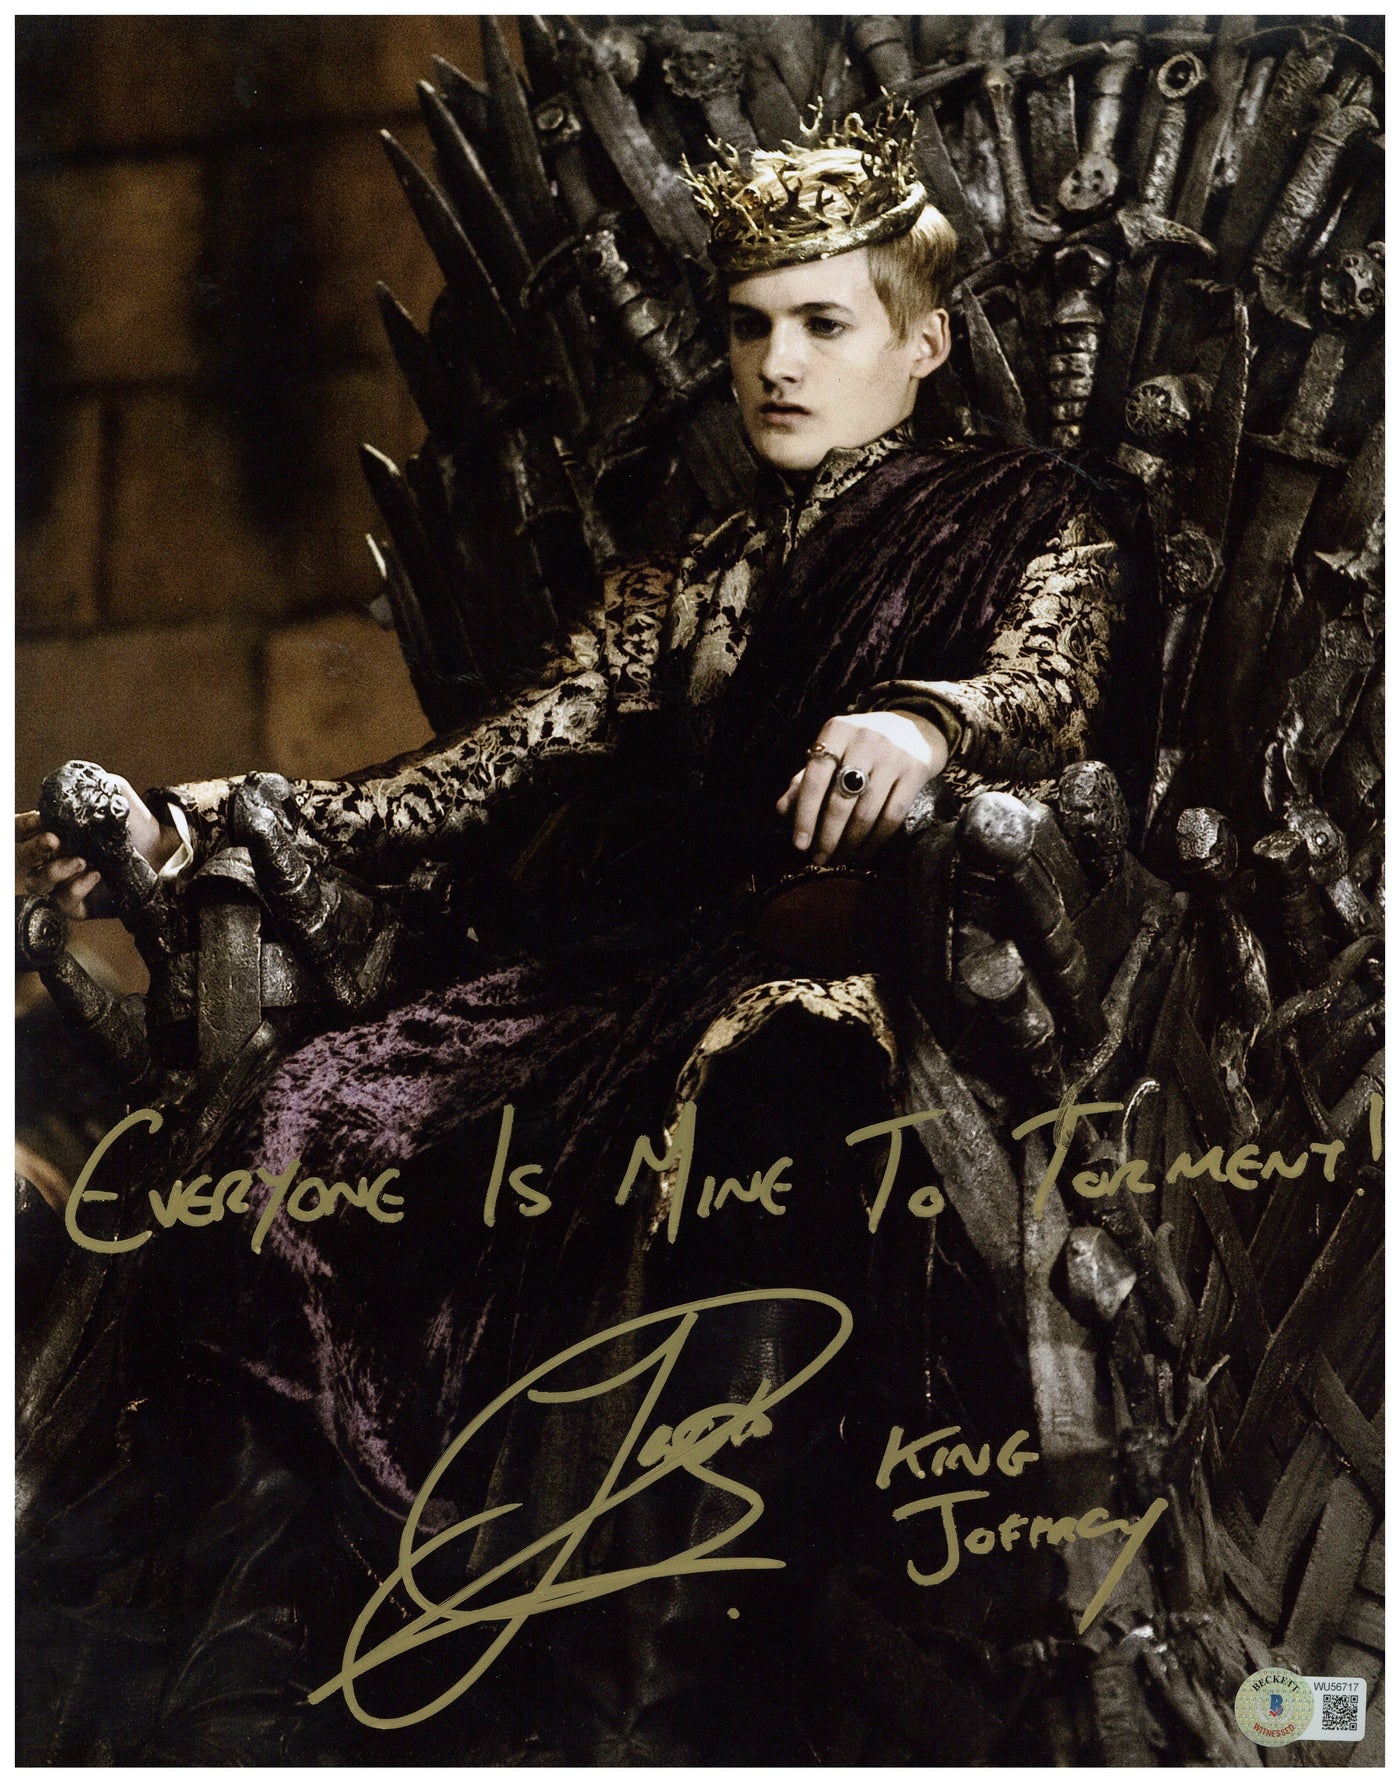 JACK GLEESON SIGNED 11X14 PHOTO GAME OF THRONES JOFFREY AUTOGRAPHED BAS